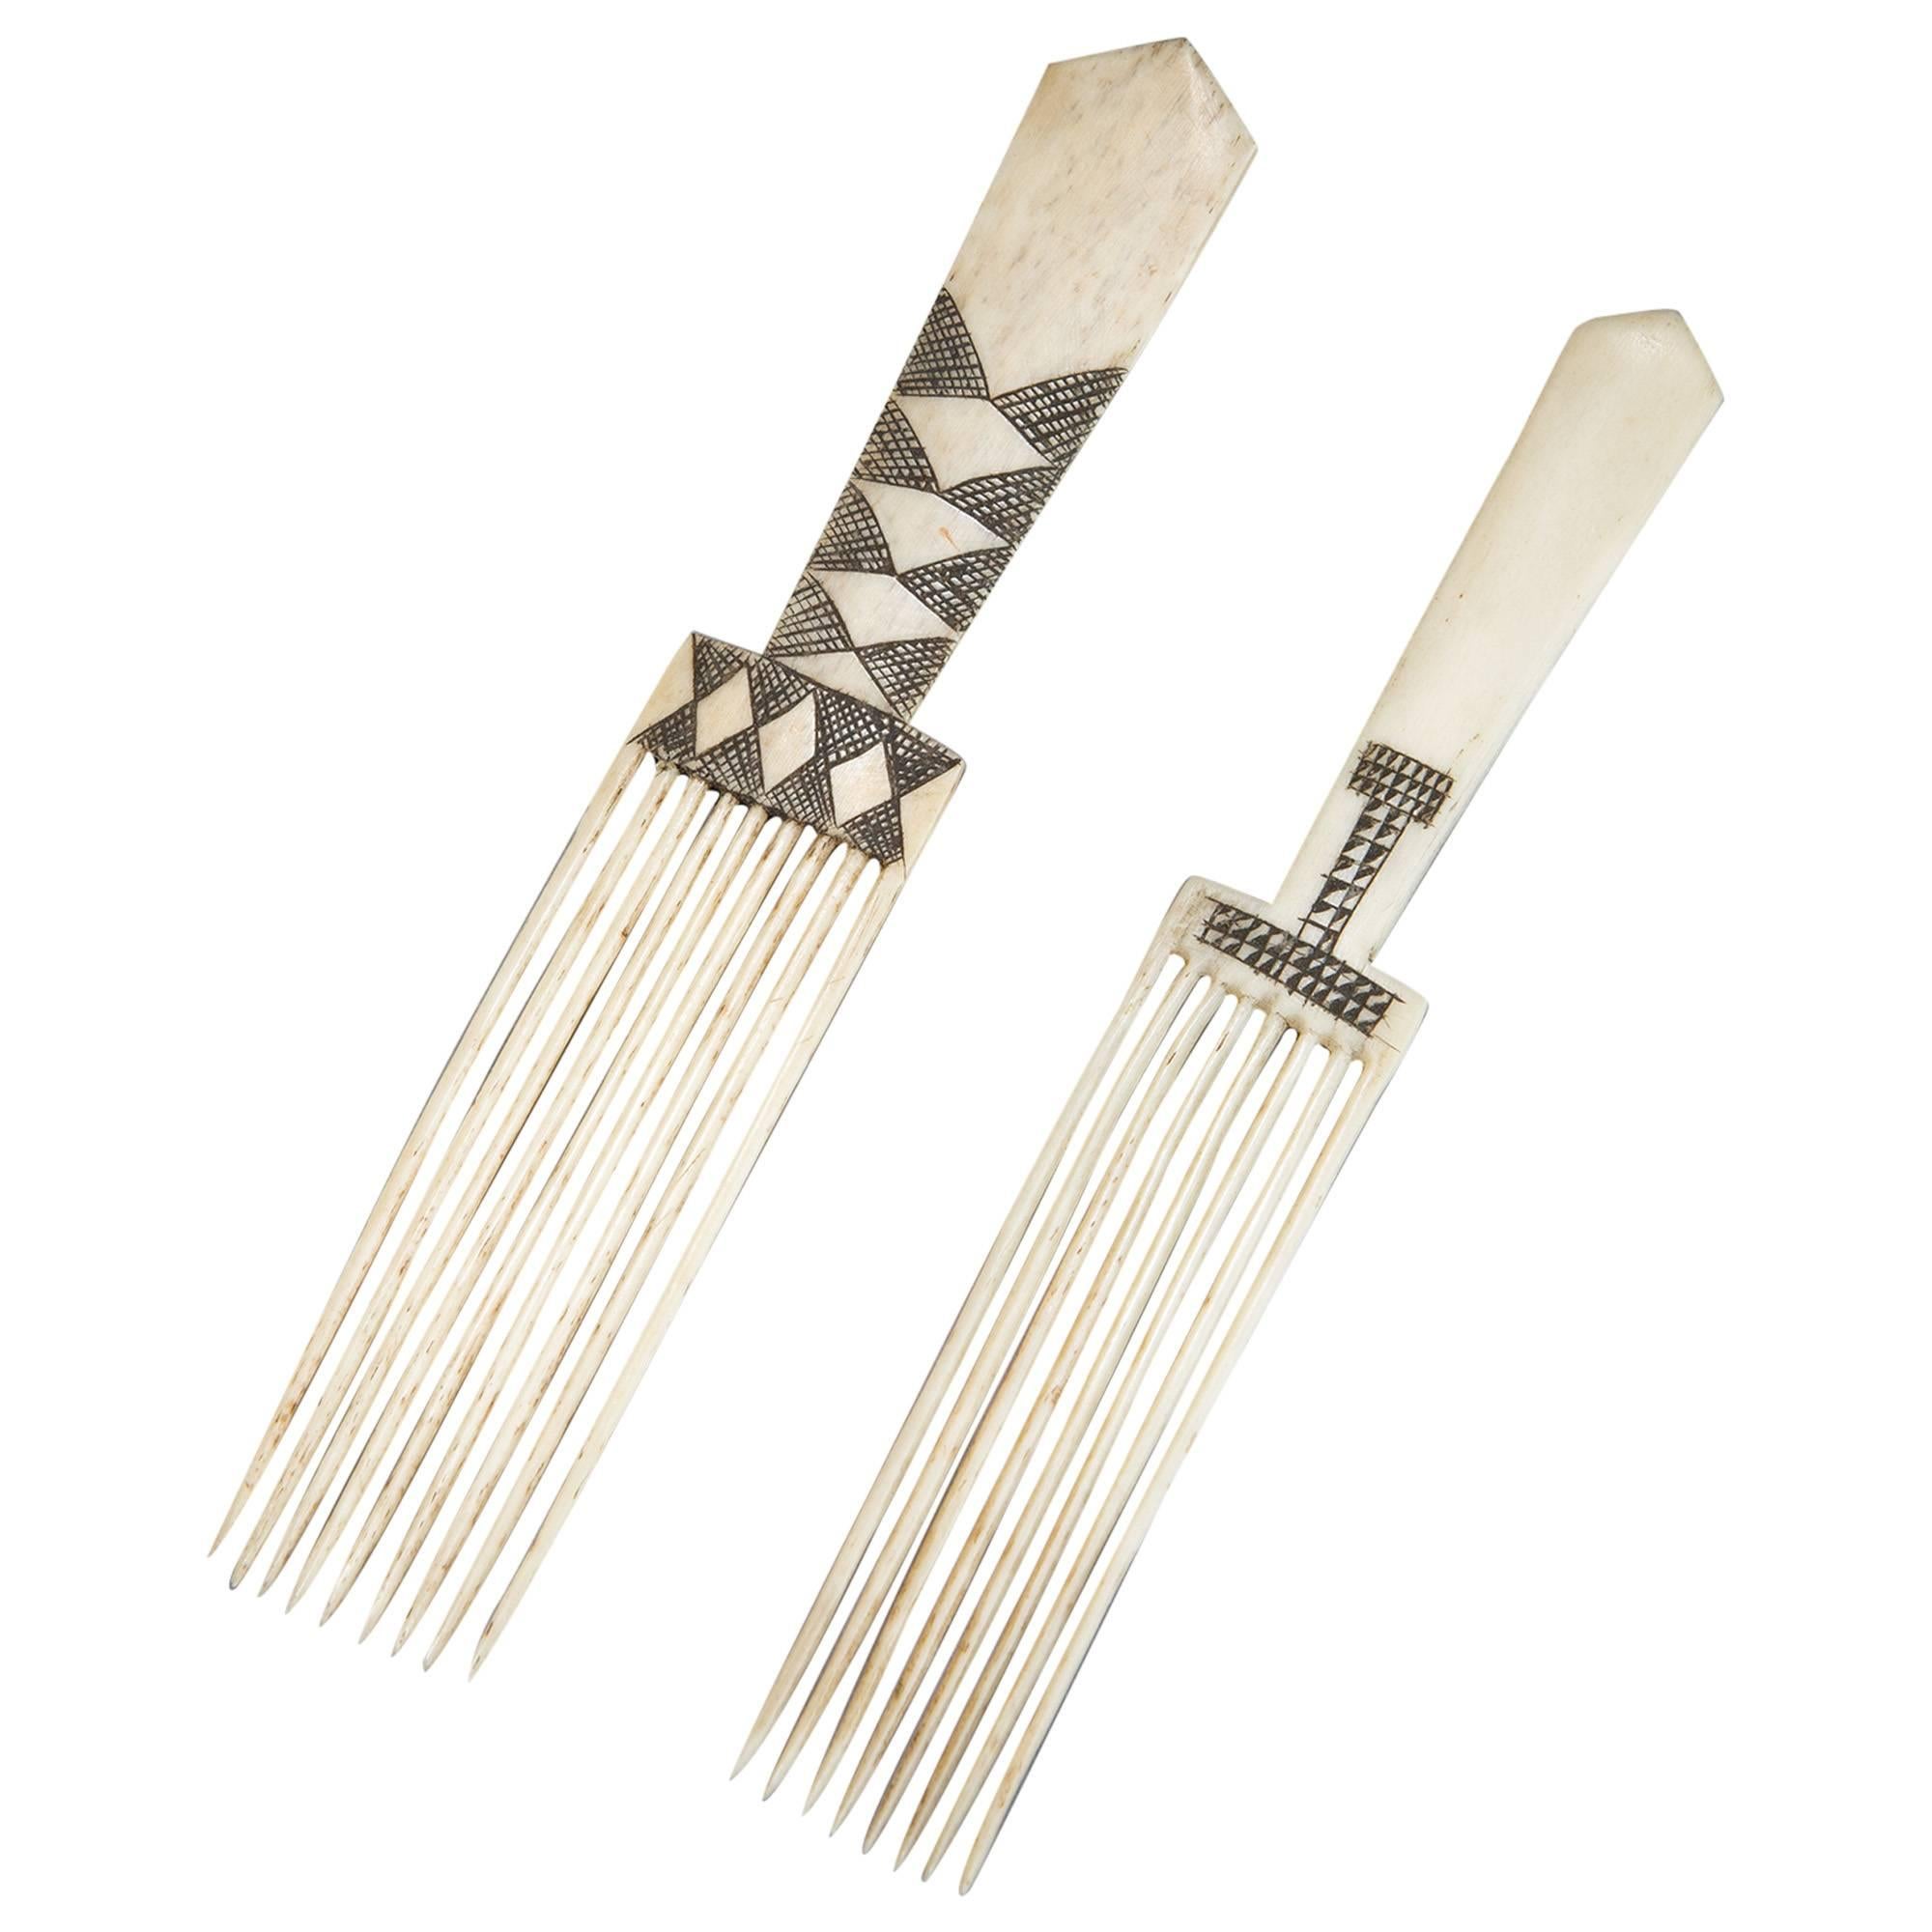 Late 19th Century Pair of Tribal Zulu Combs